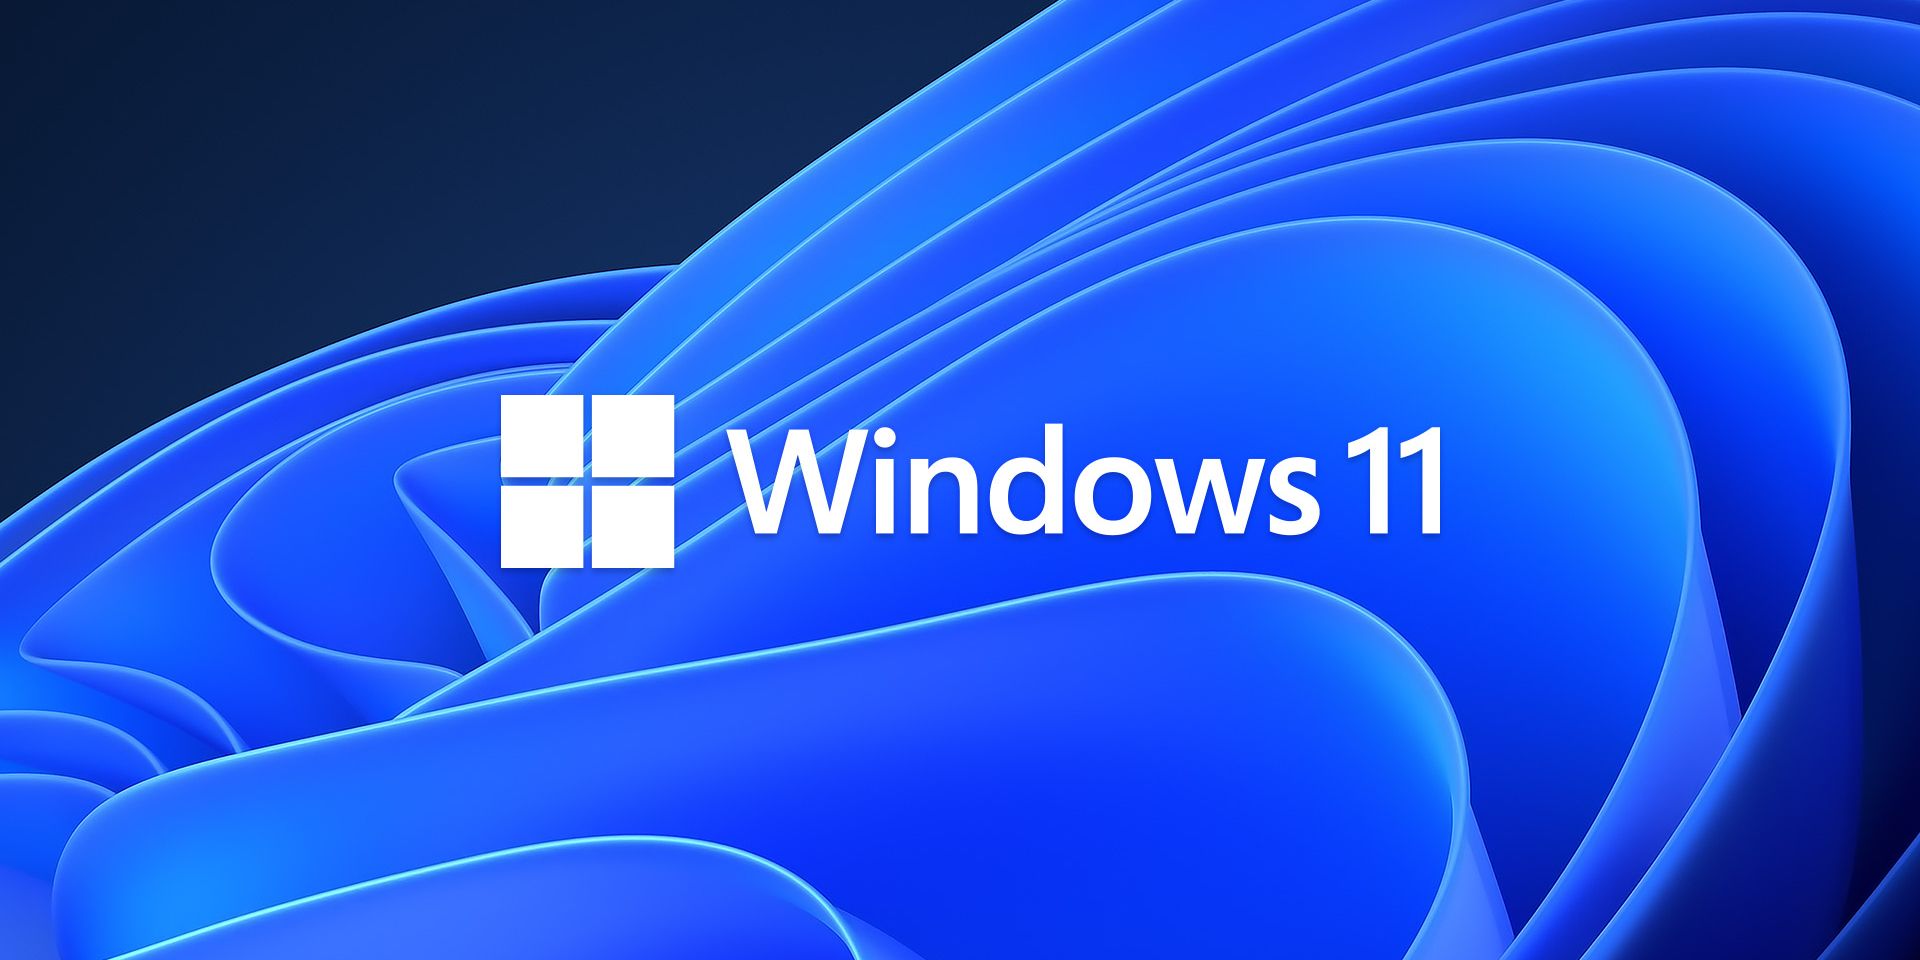 Official Windows 11 logo from Microsoft